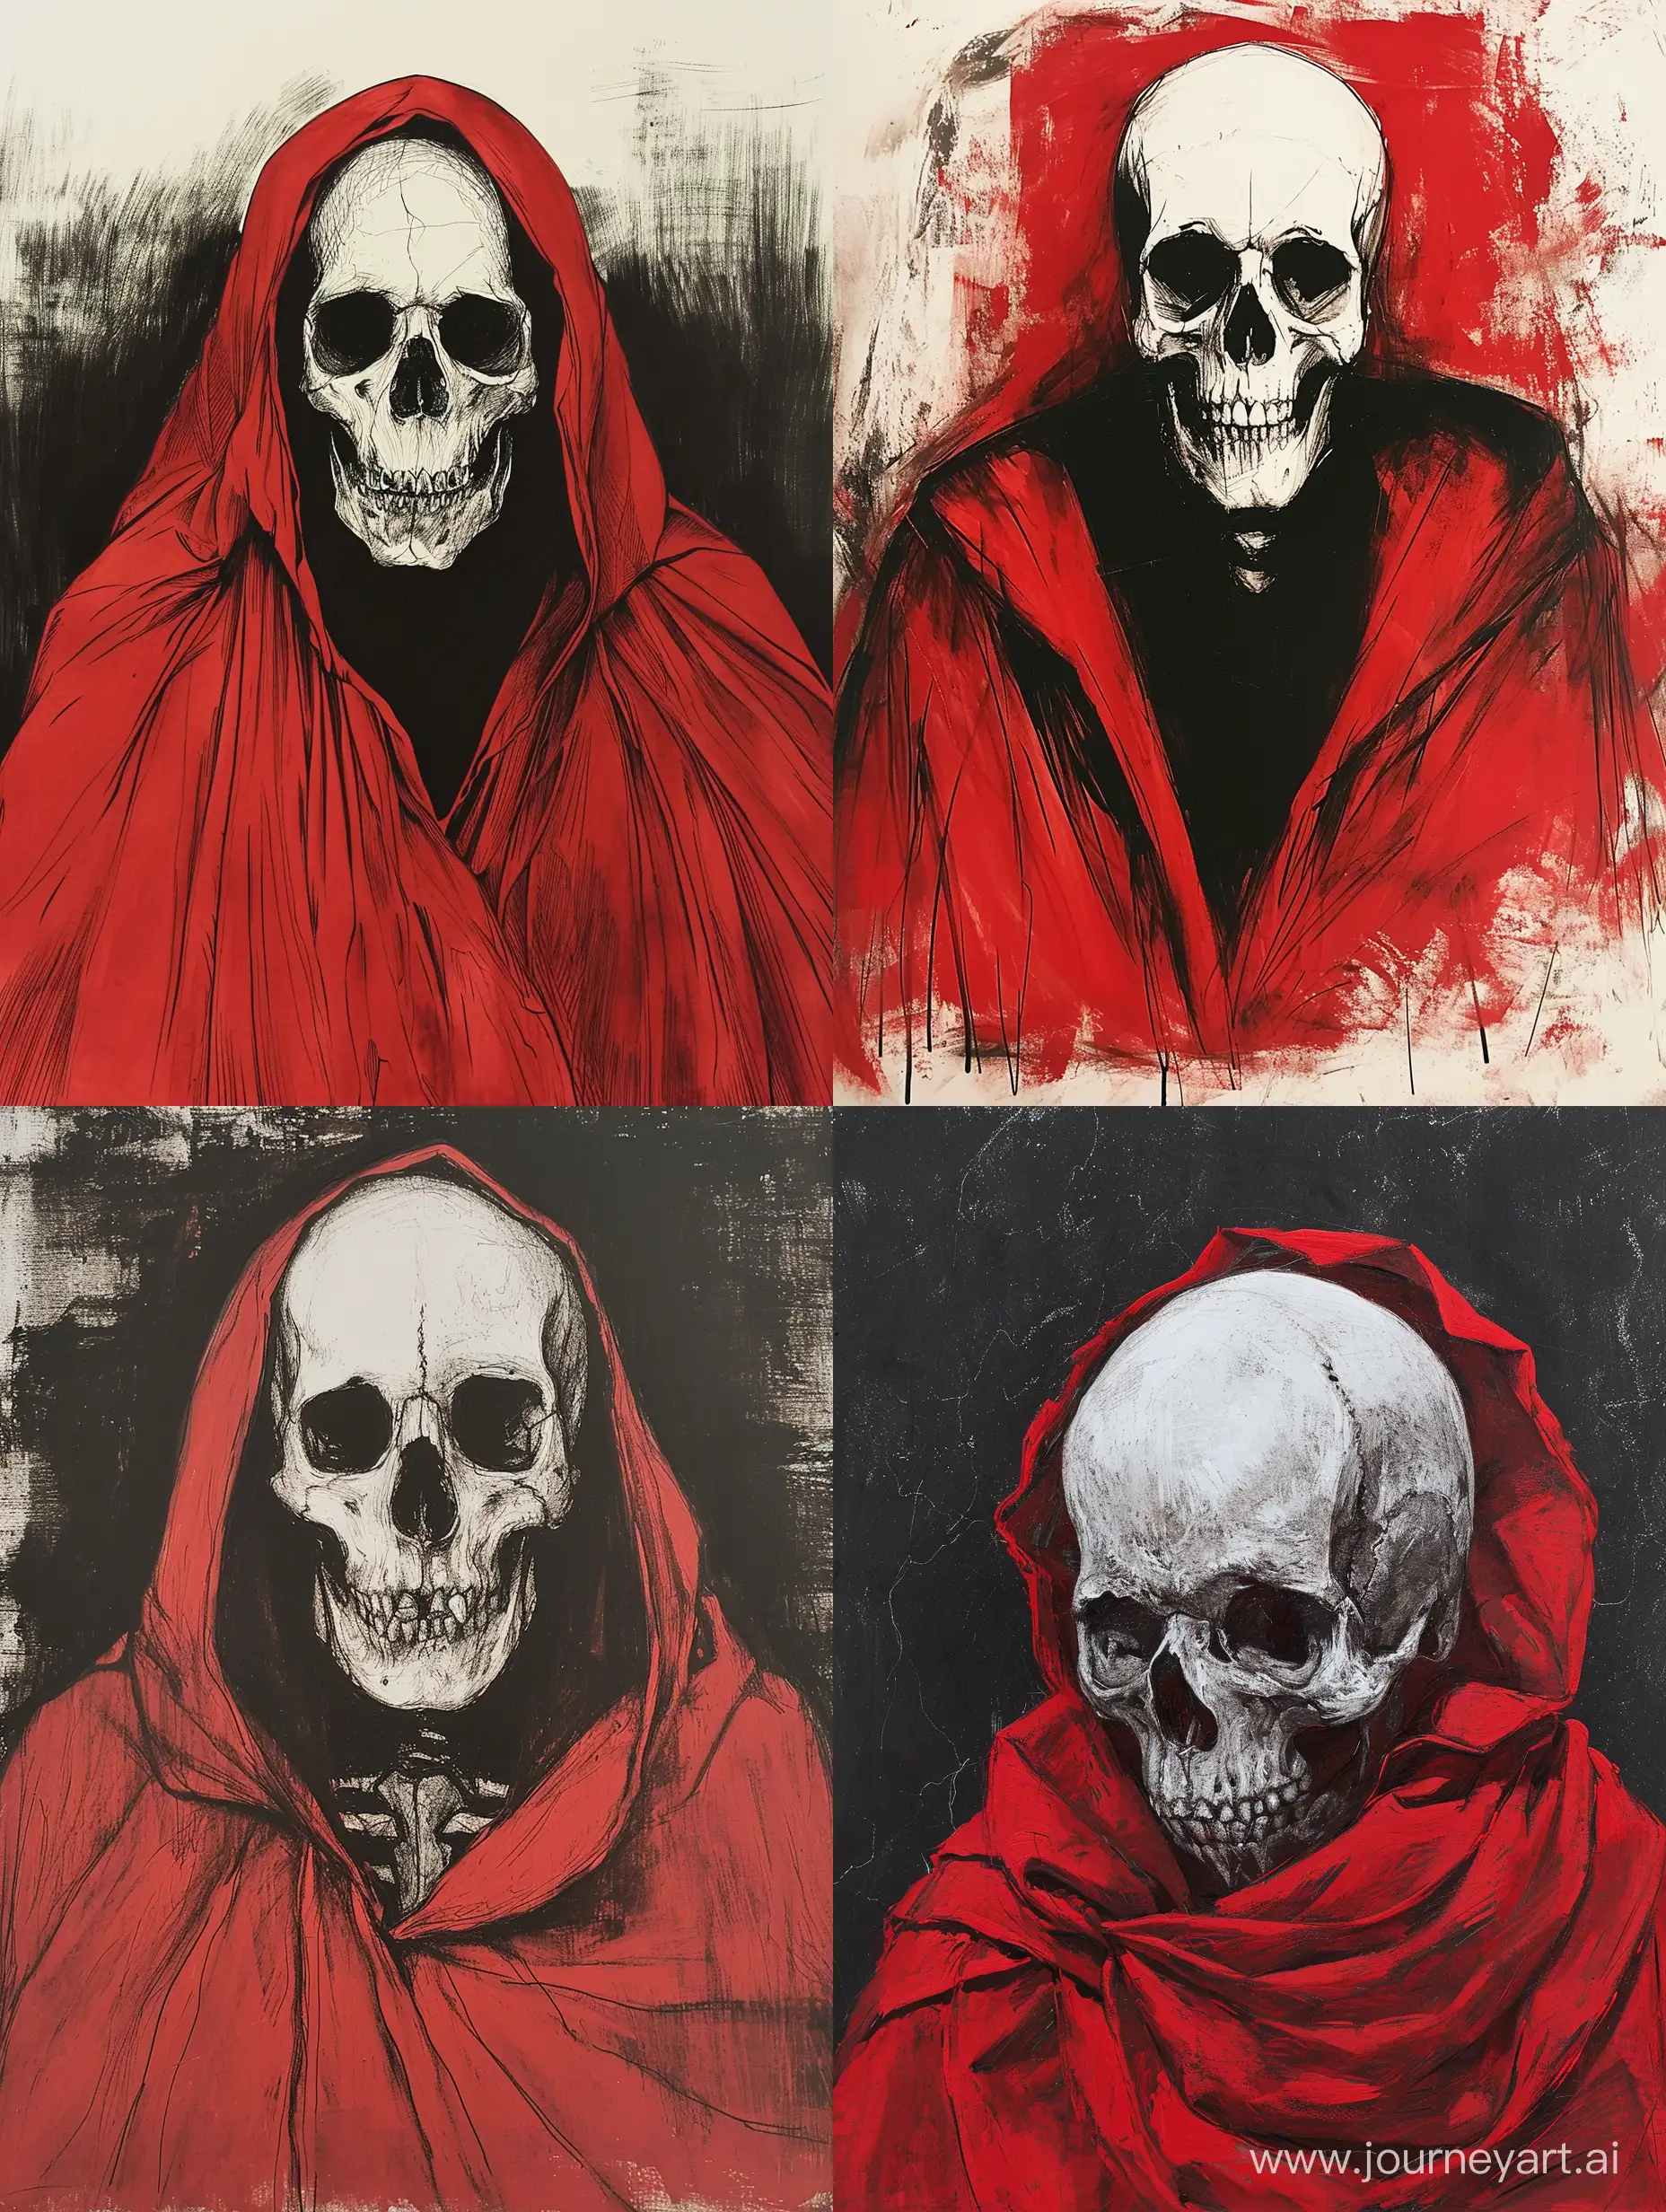 Urban-Drawing-Mysterious-Red-Cloaked-Figure-with-Frontal-White-Skull